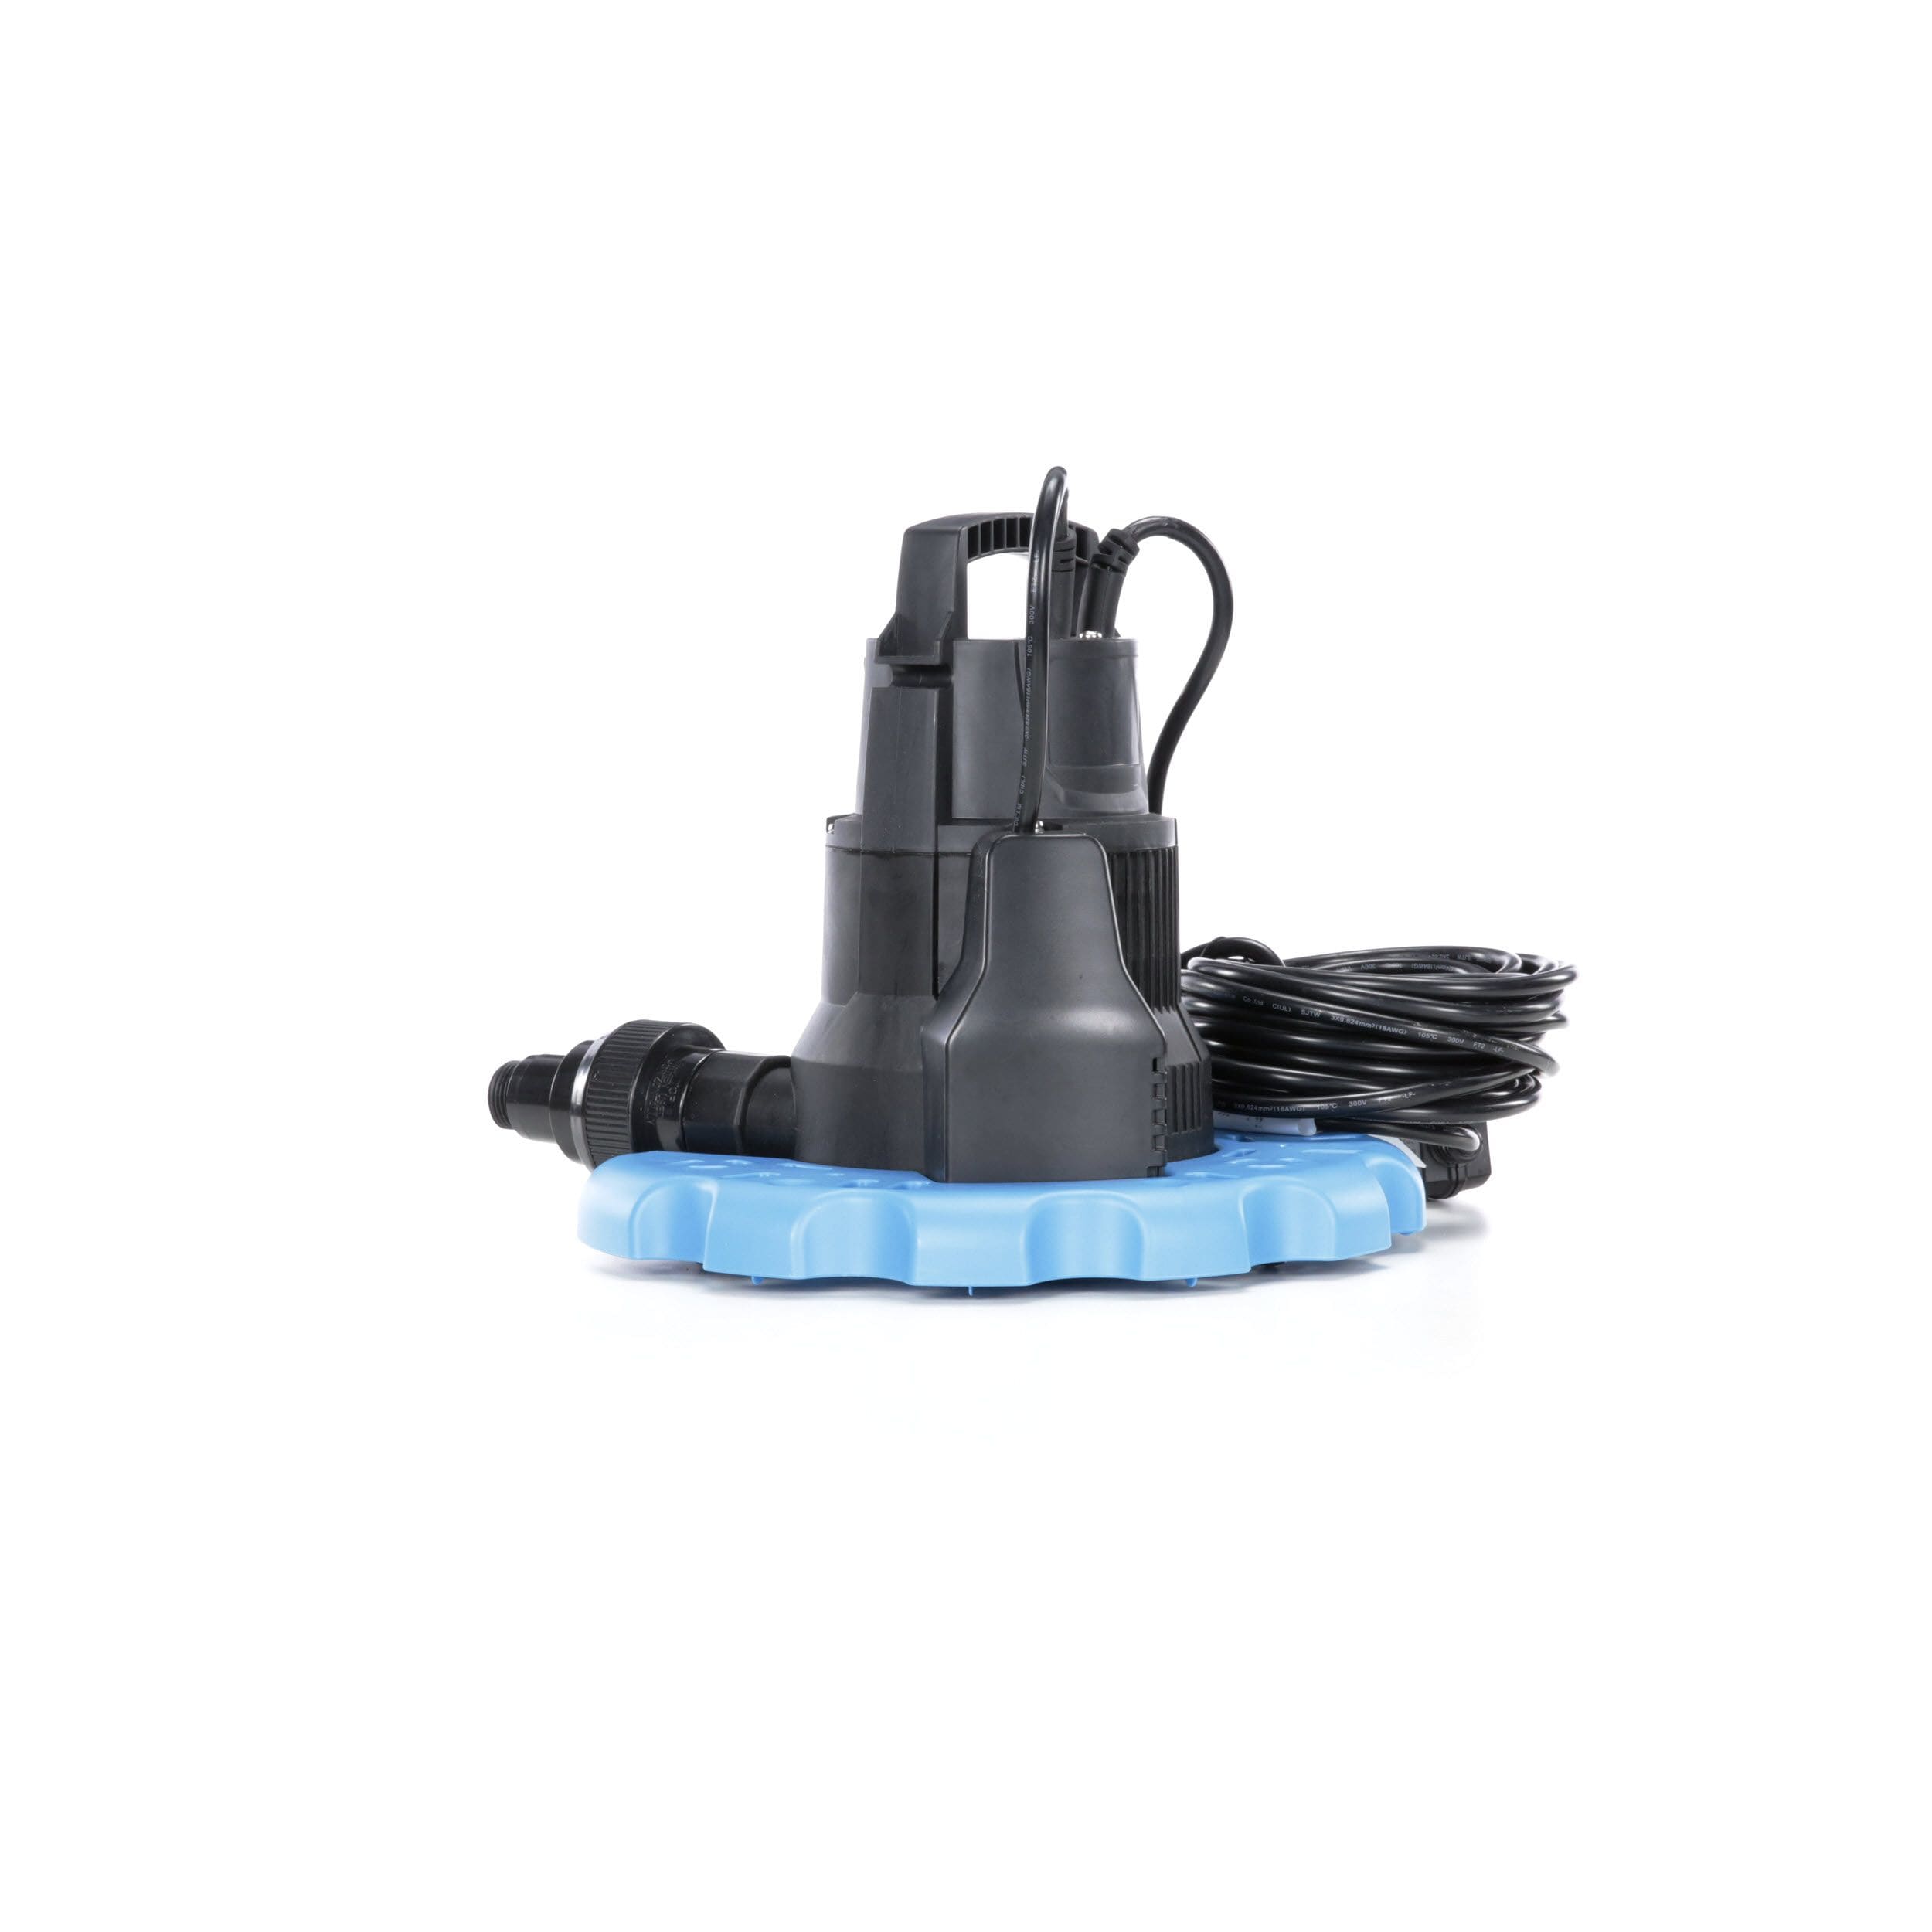 Cpa Swimming Pool Pump Summersa Dab Eurocover Reversing Cover Winter and Swimming Pool